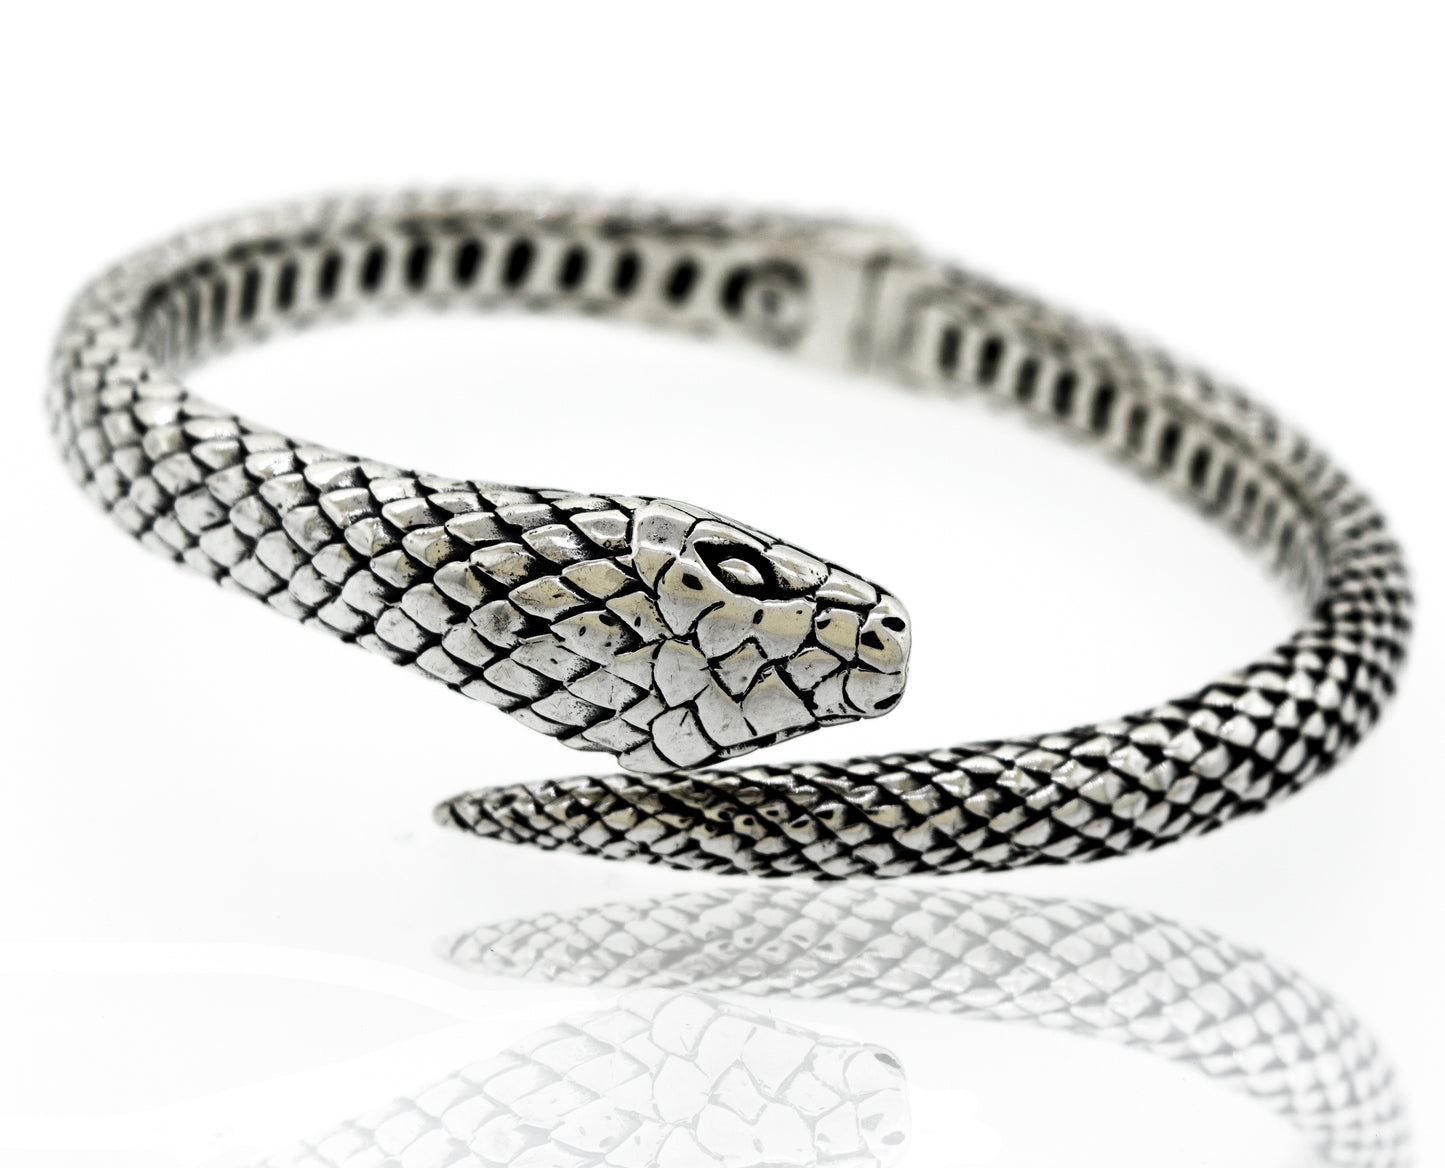 A stunning Enchanting Hinge Snake Bracelet from the Super Silver artisan collections, crafted with sterling silver, displayed elegantly on a white surface.